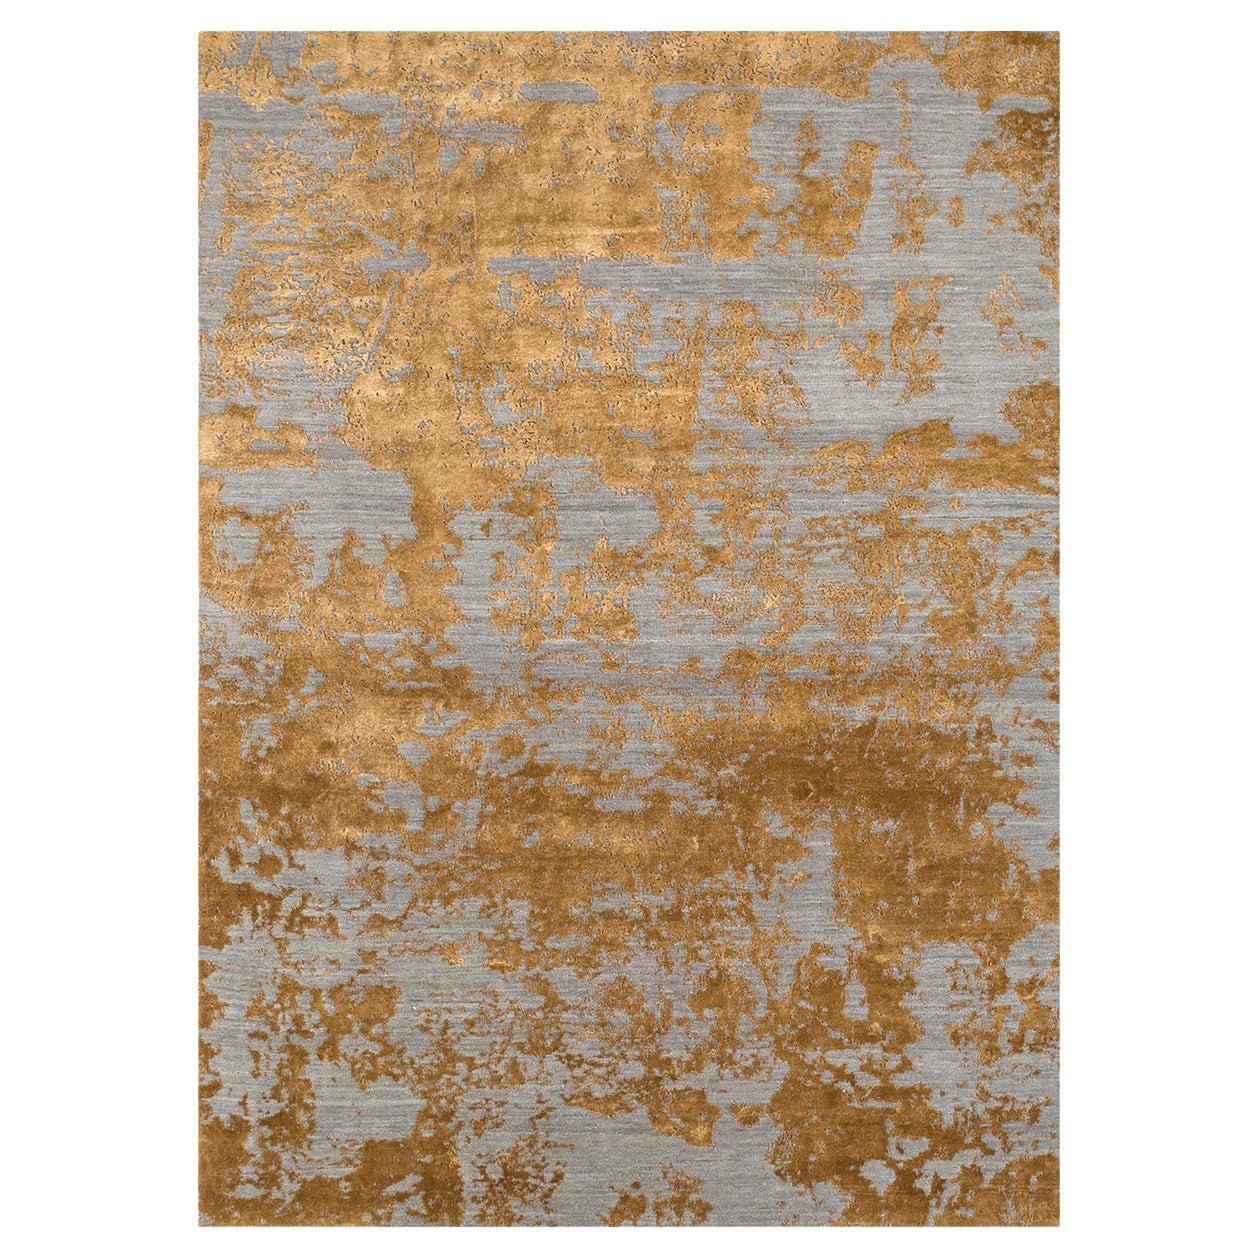 Flake Rug by Rural Weavers, Knotted, Wool, Bamboo Silk, 240x300cm